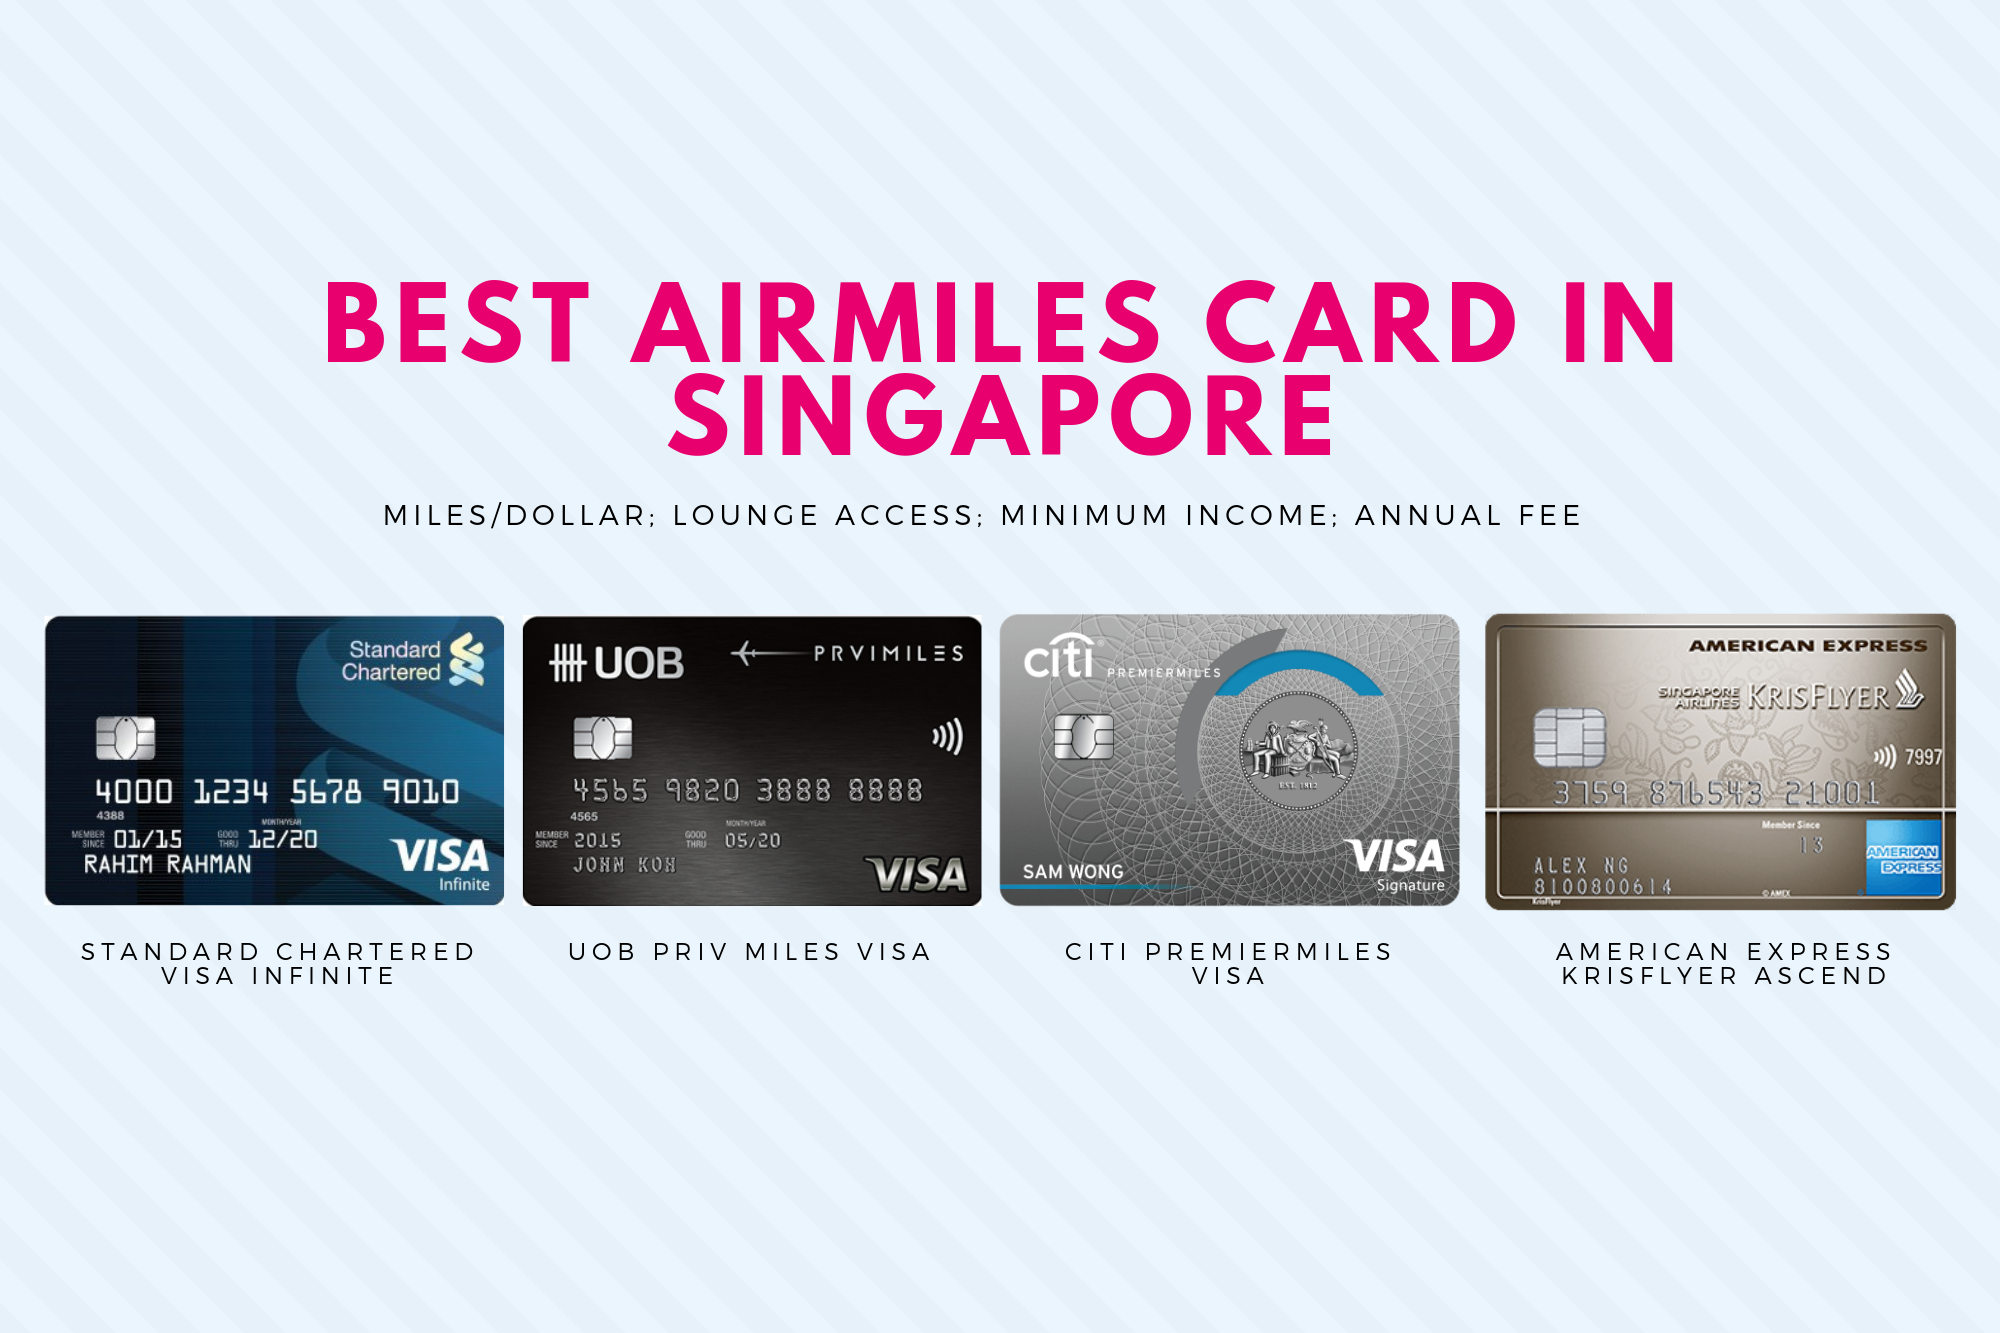 American Express KrisFlyer Ascend; Citi PremierMiles; UOB PRVI; Standard Chartered Visa Infinite – The best idea AirMiles Card For you personally?